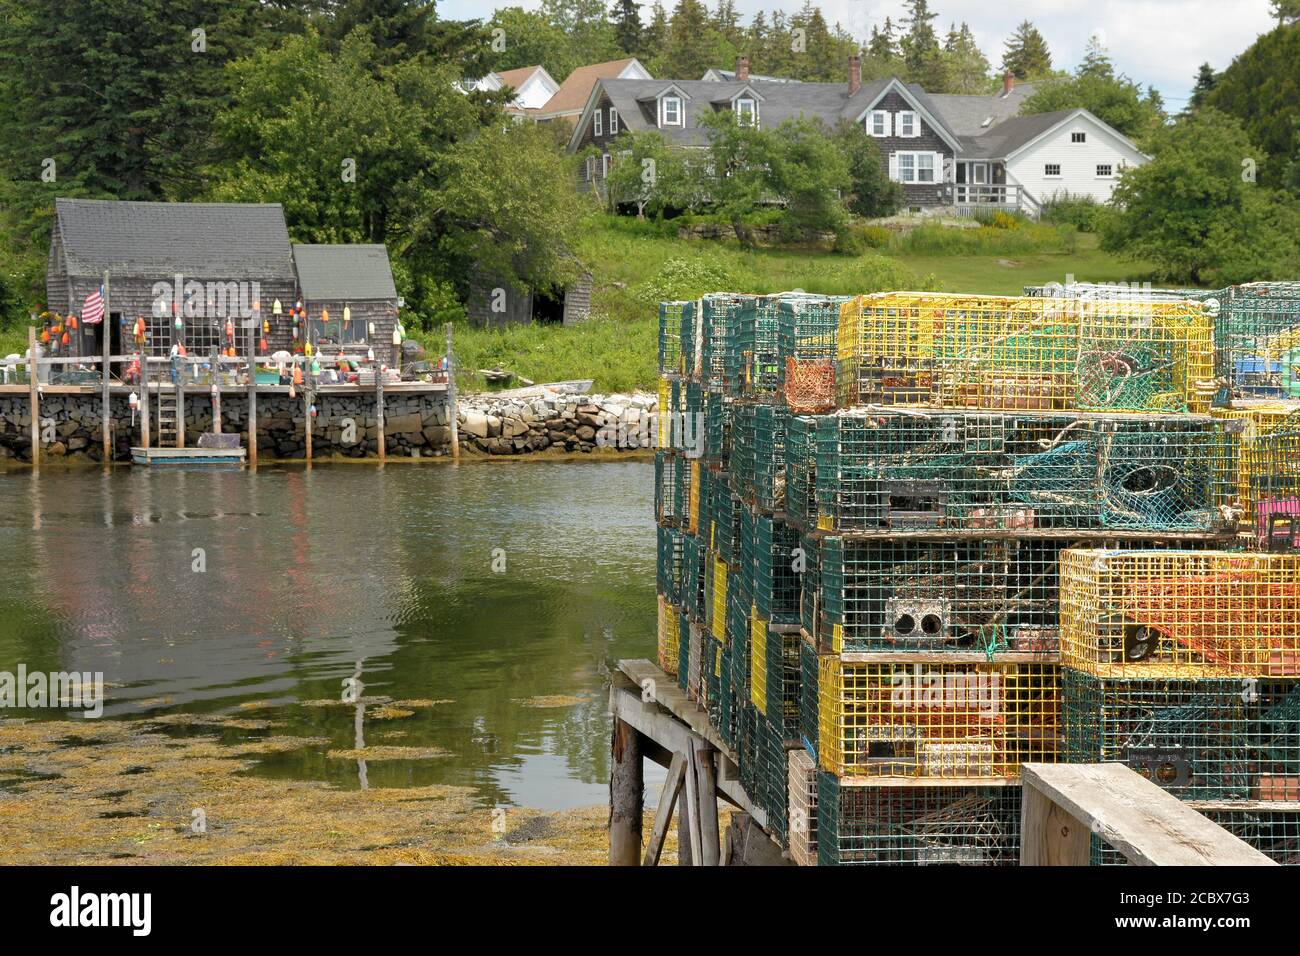 Picturesque fishing village of Port Clyde, Maine. Lobster traps stacked on  dock in harbor and lobster shack decorated with colorful buoys Stock Photo  - Alamy